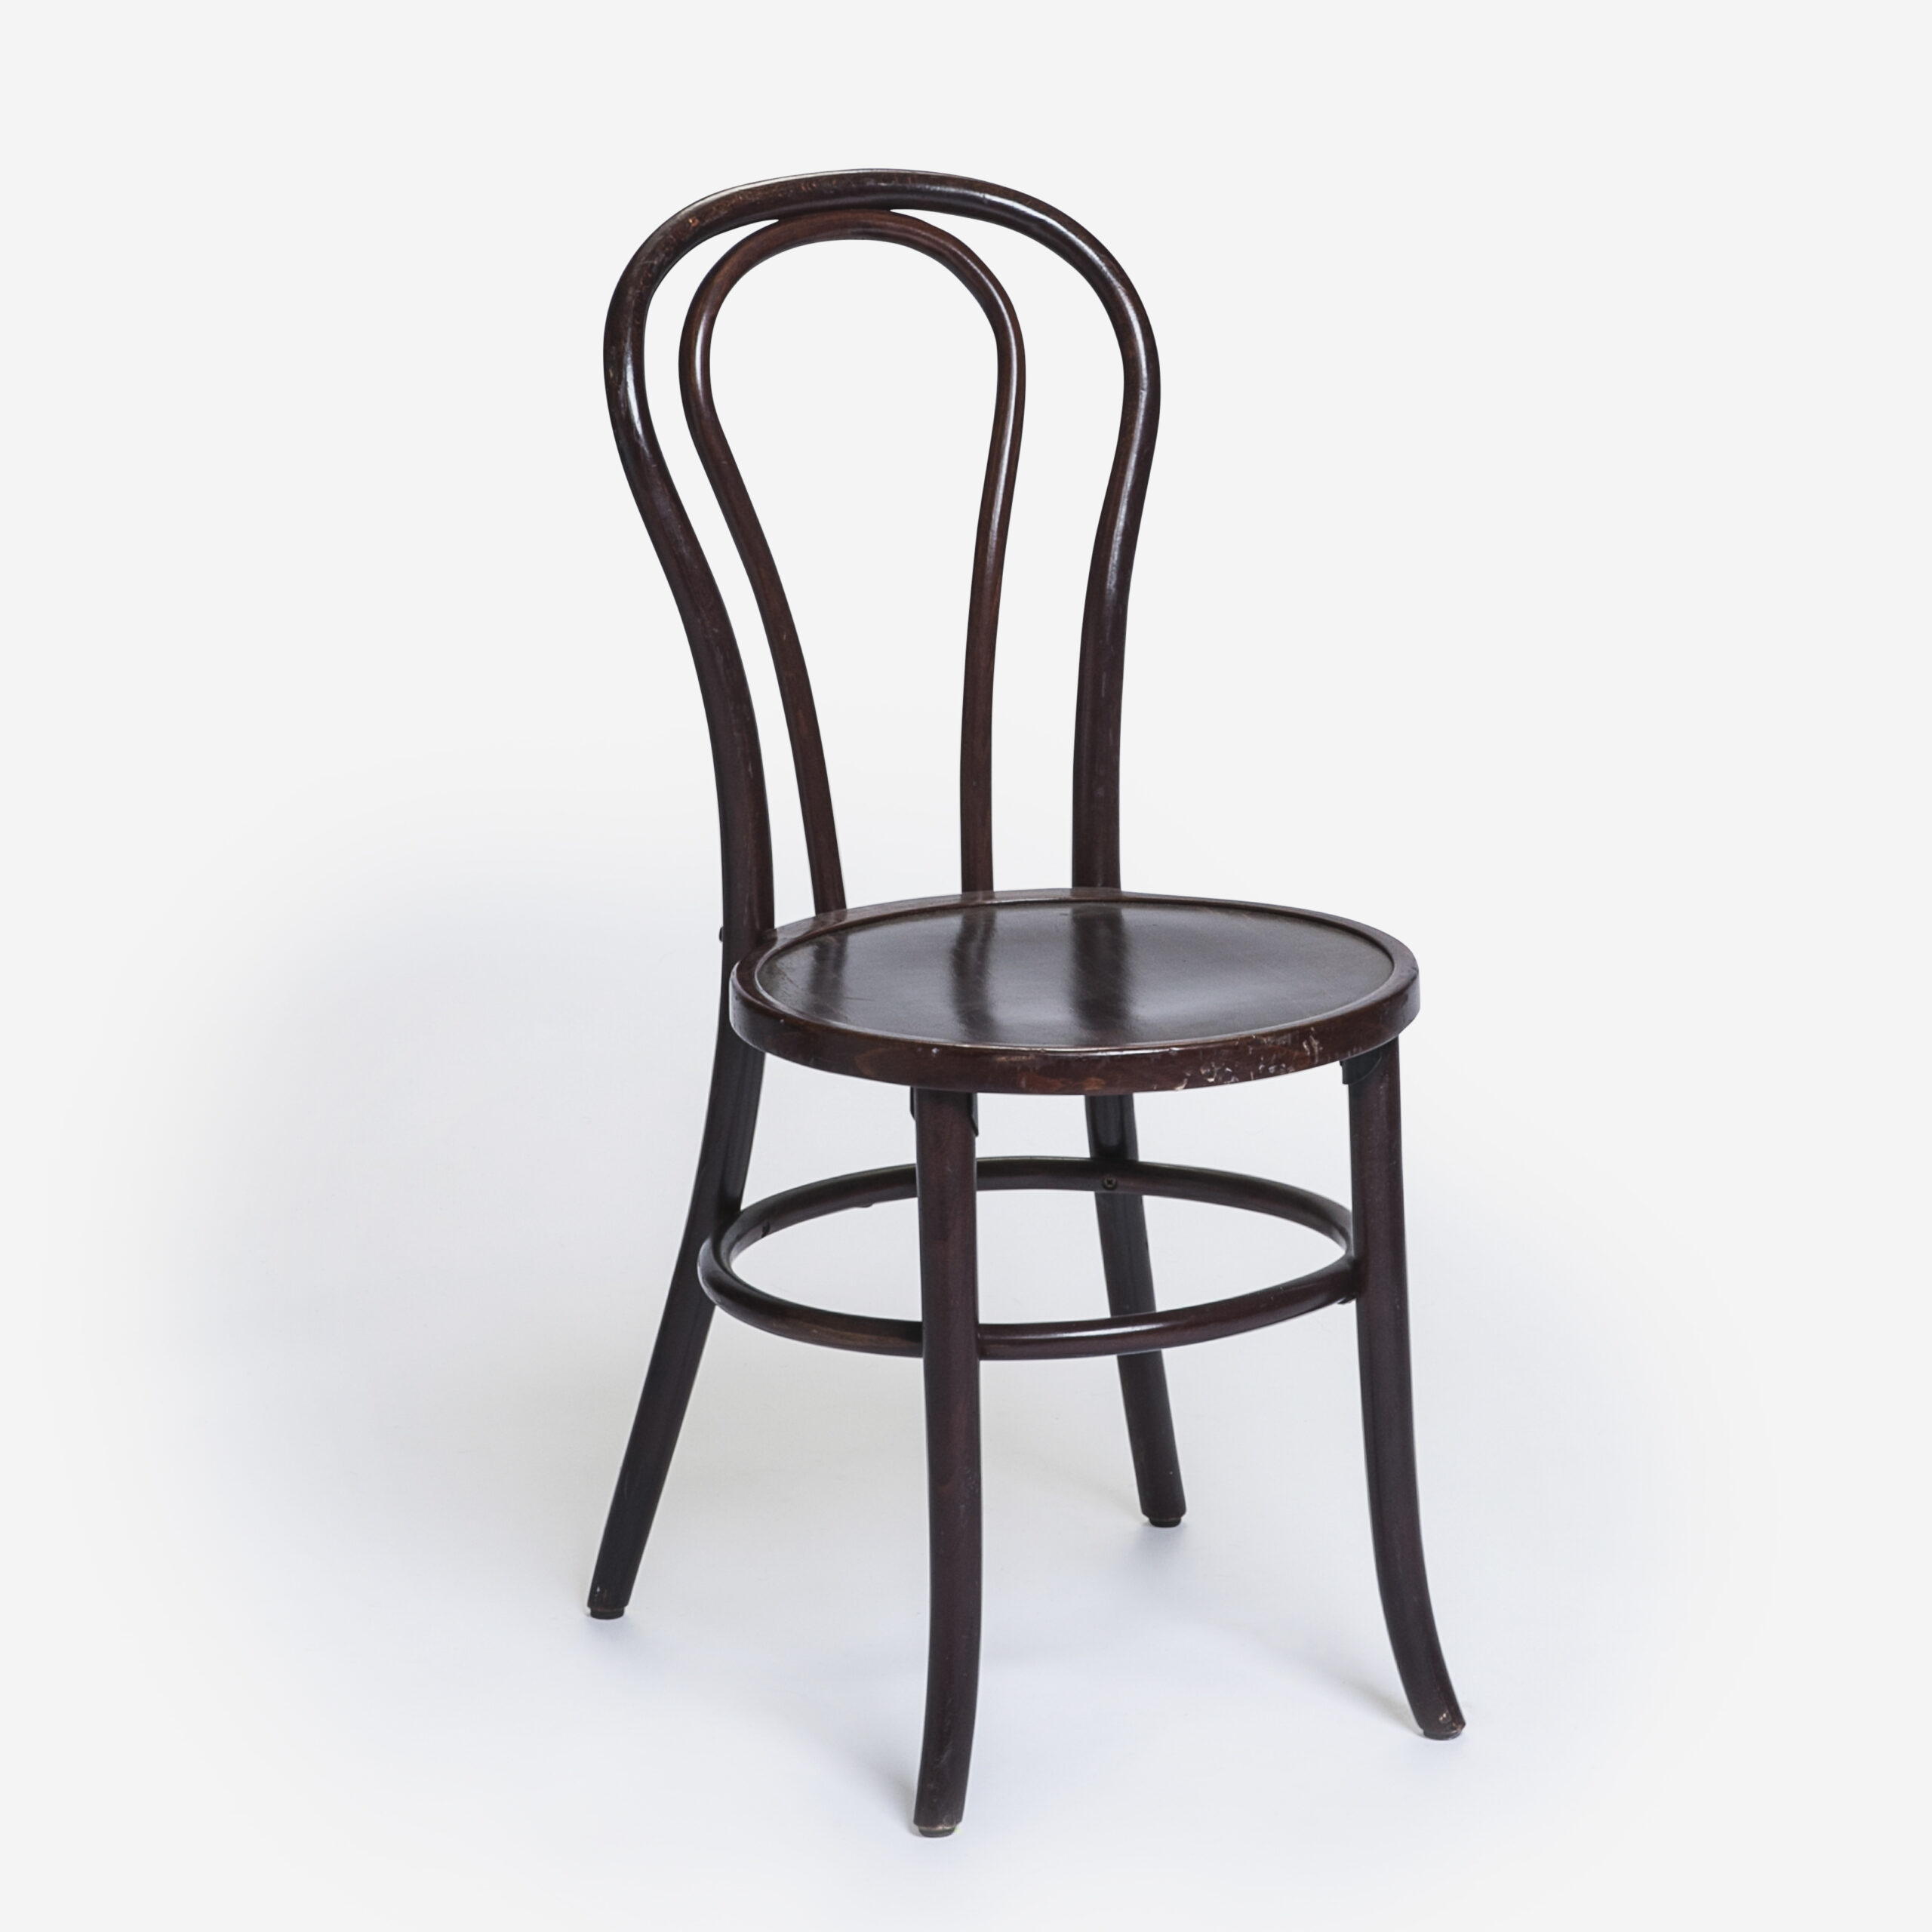 Timber Bentwood Chair